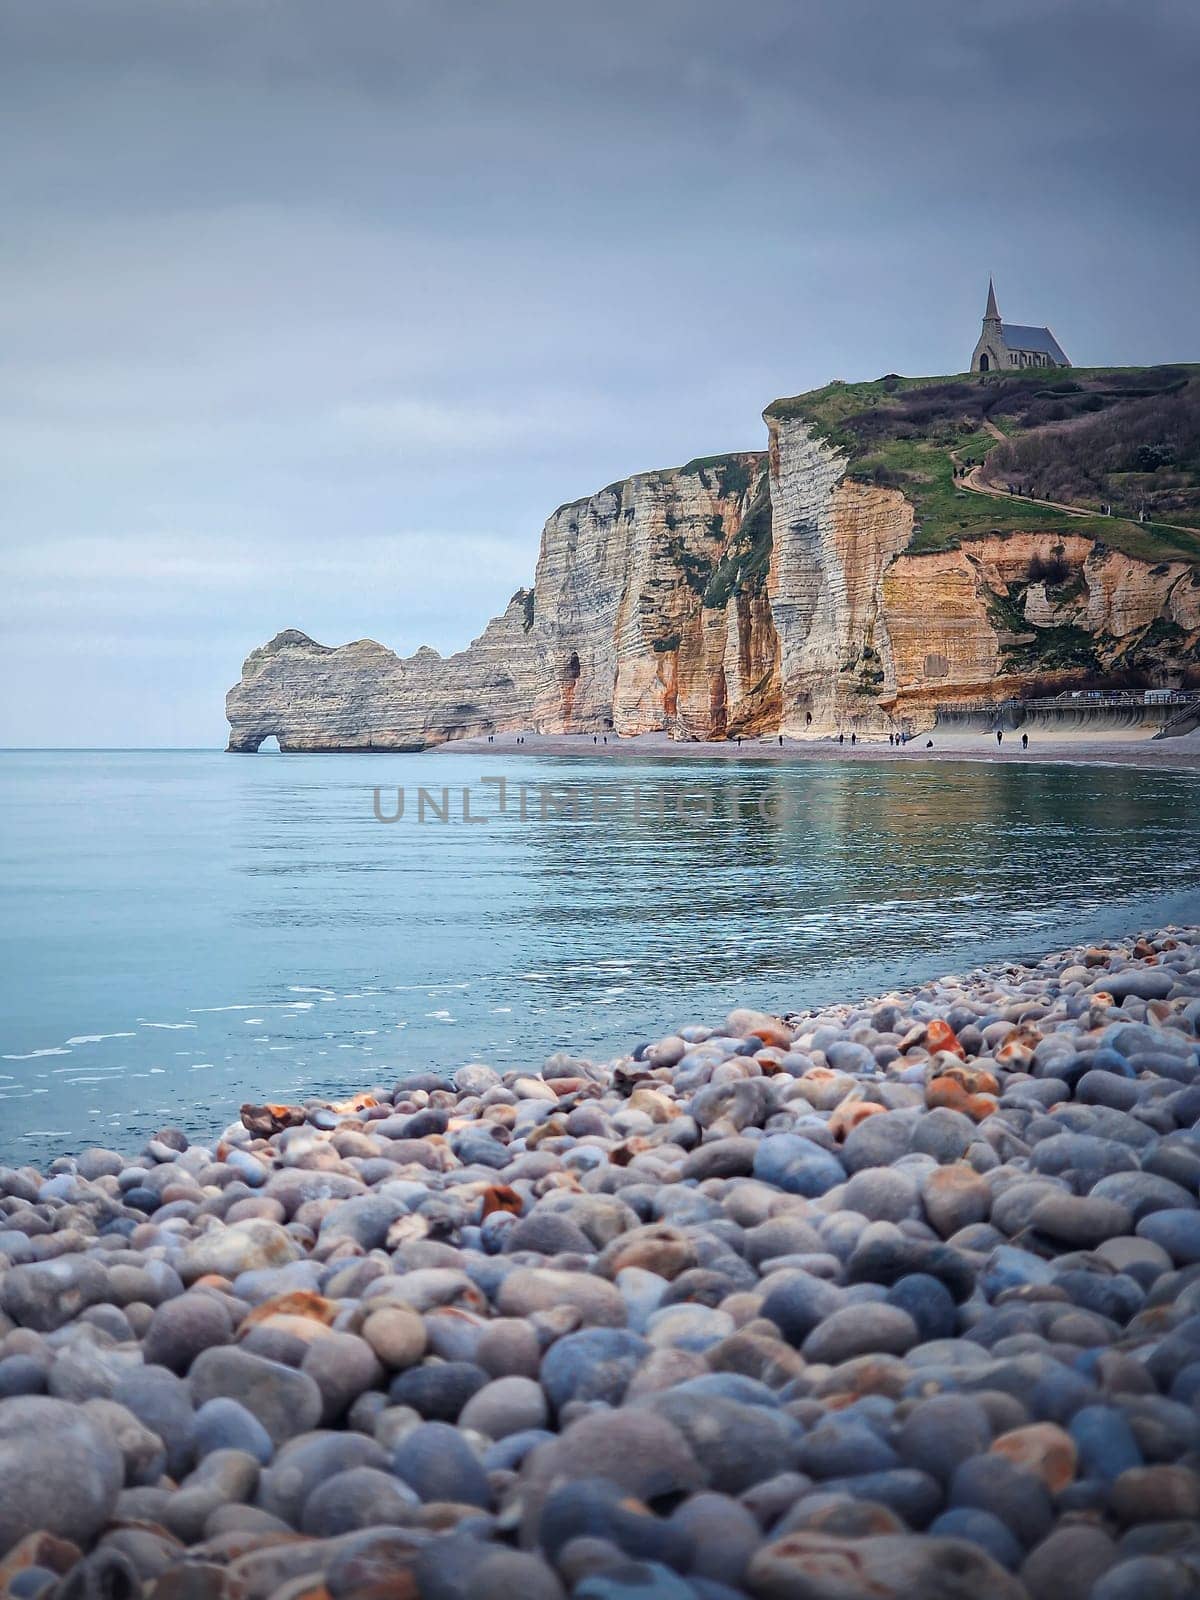 Sightseeing view to Etretat coastline with the famous Notre-Dame de la Garde chapel on the Amont cliff. Pebble beach washed by Atlantic ocean waters, Normandy, France by psychoshadow